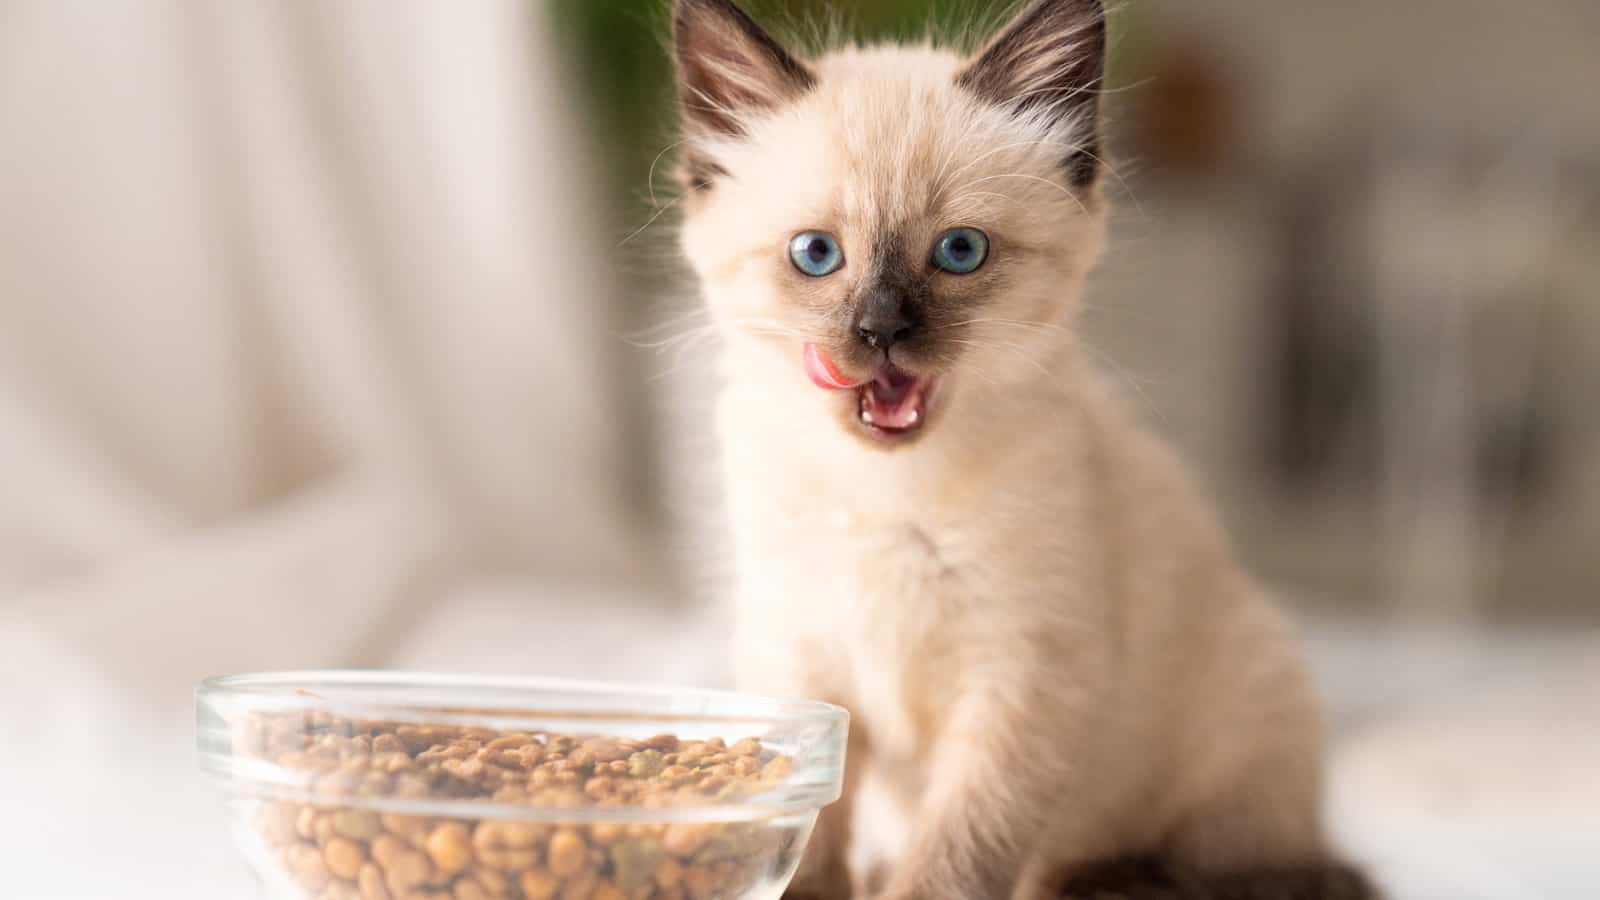 Funny little fluffy kitten eats dry food from a bowl; overfeeding